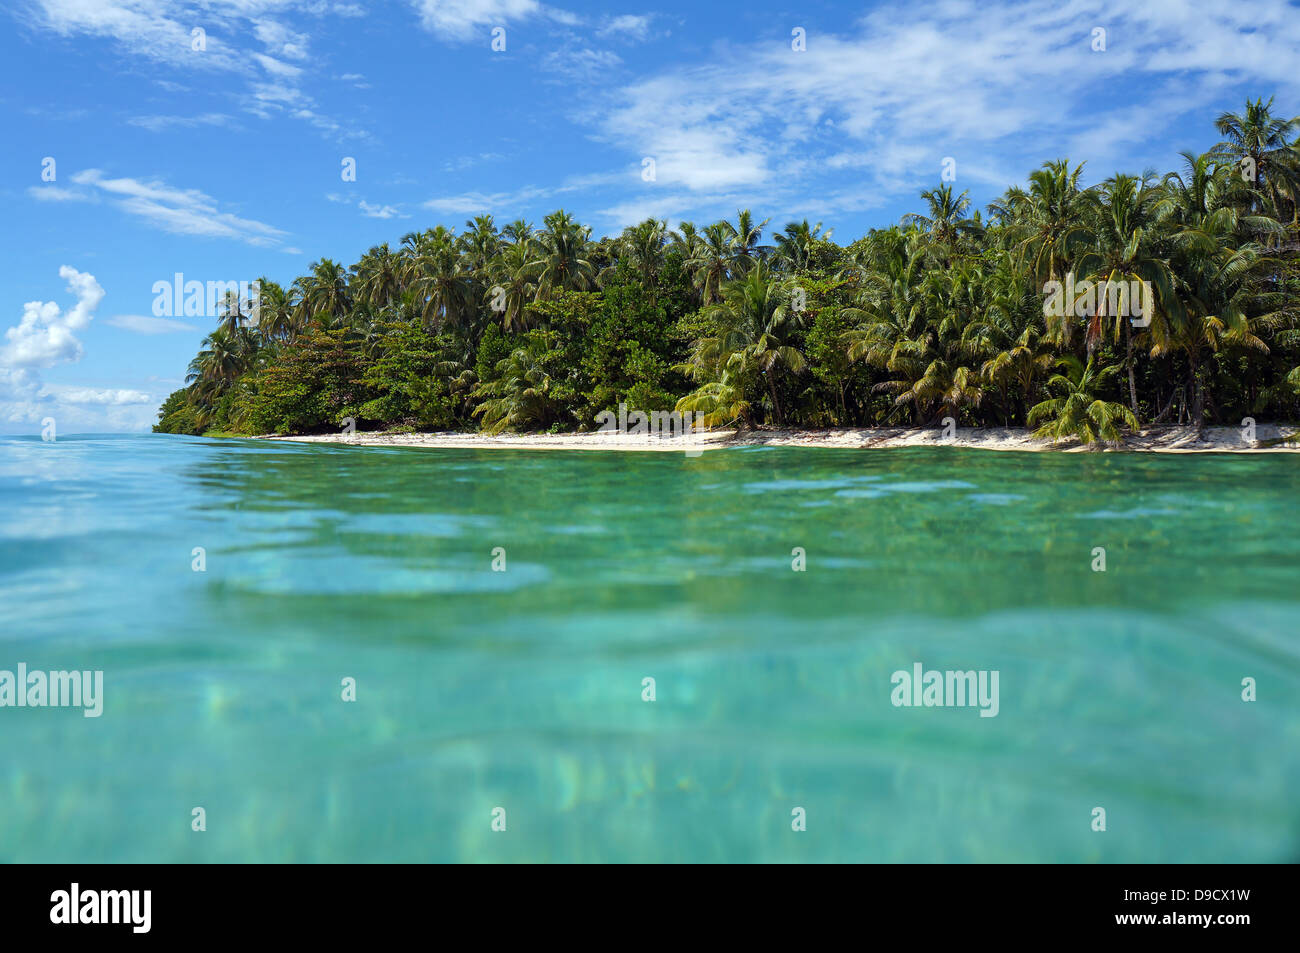 View from the water surface on a tropical island beach with luxuriant vegetation,  Zapatillas isles, Bocas del Toro, Panama Stock Photo